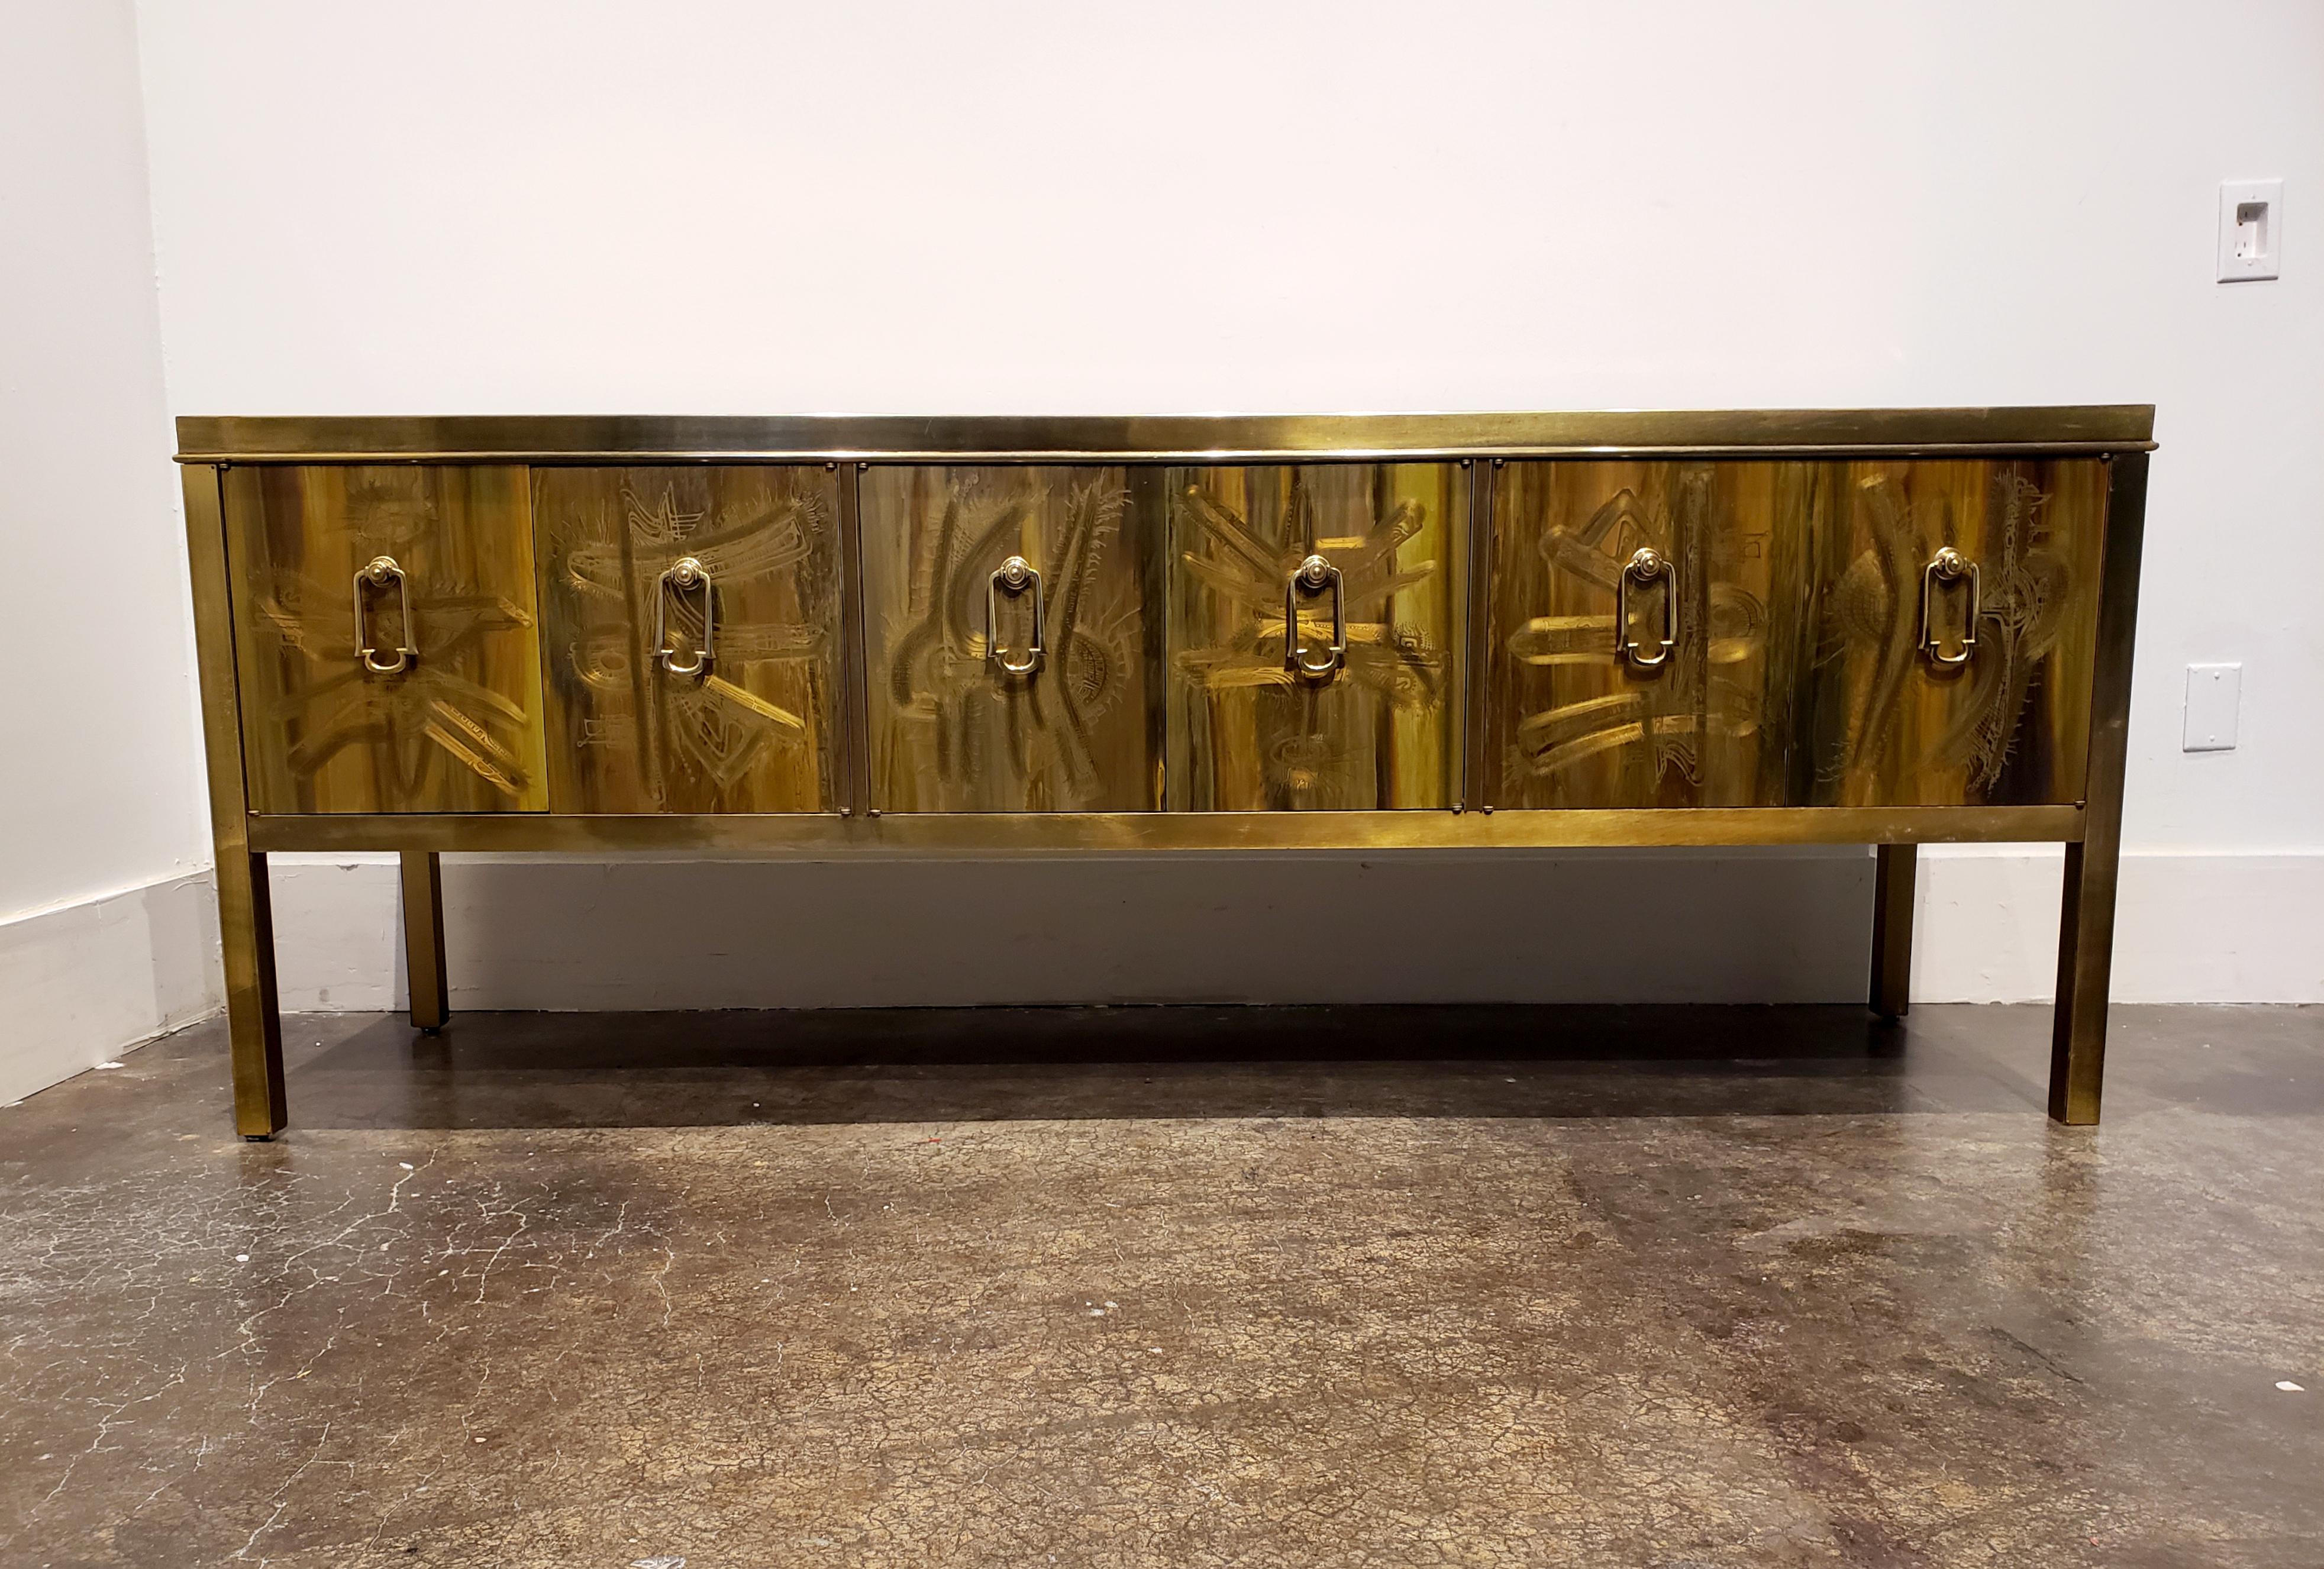 Stunning, all brass dresser from Bernhard Rohne for Mastercraft, circa 1970s. Absolutely unique technique by Rhone; acid-etched panels on doors, side and top accentuated by subtle colored resin/polyurethane finish. Front doors have heavy brass